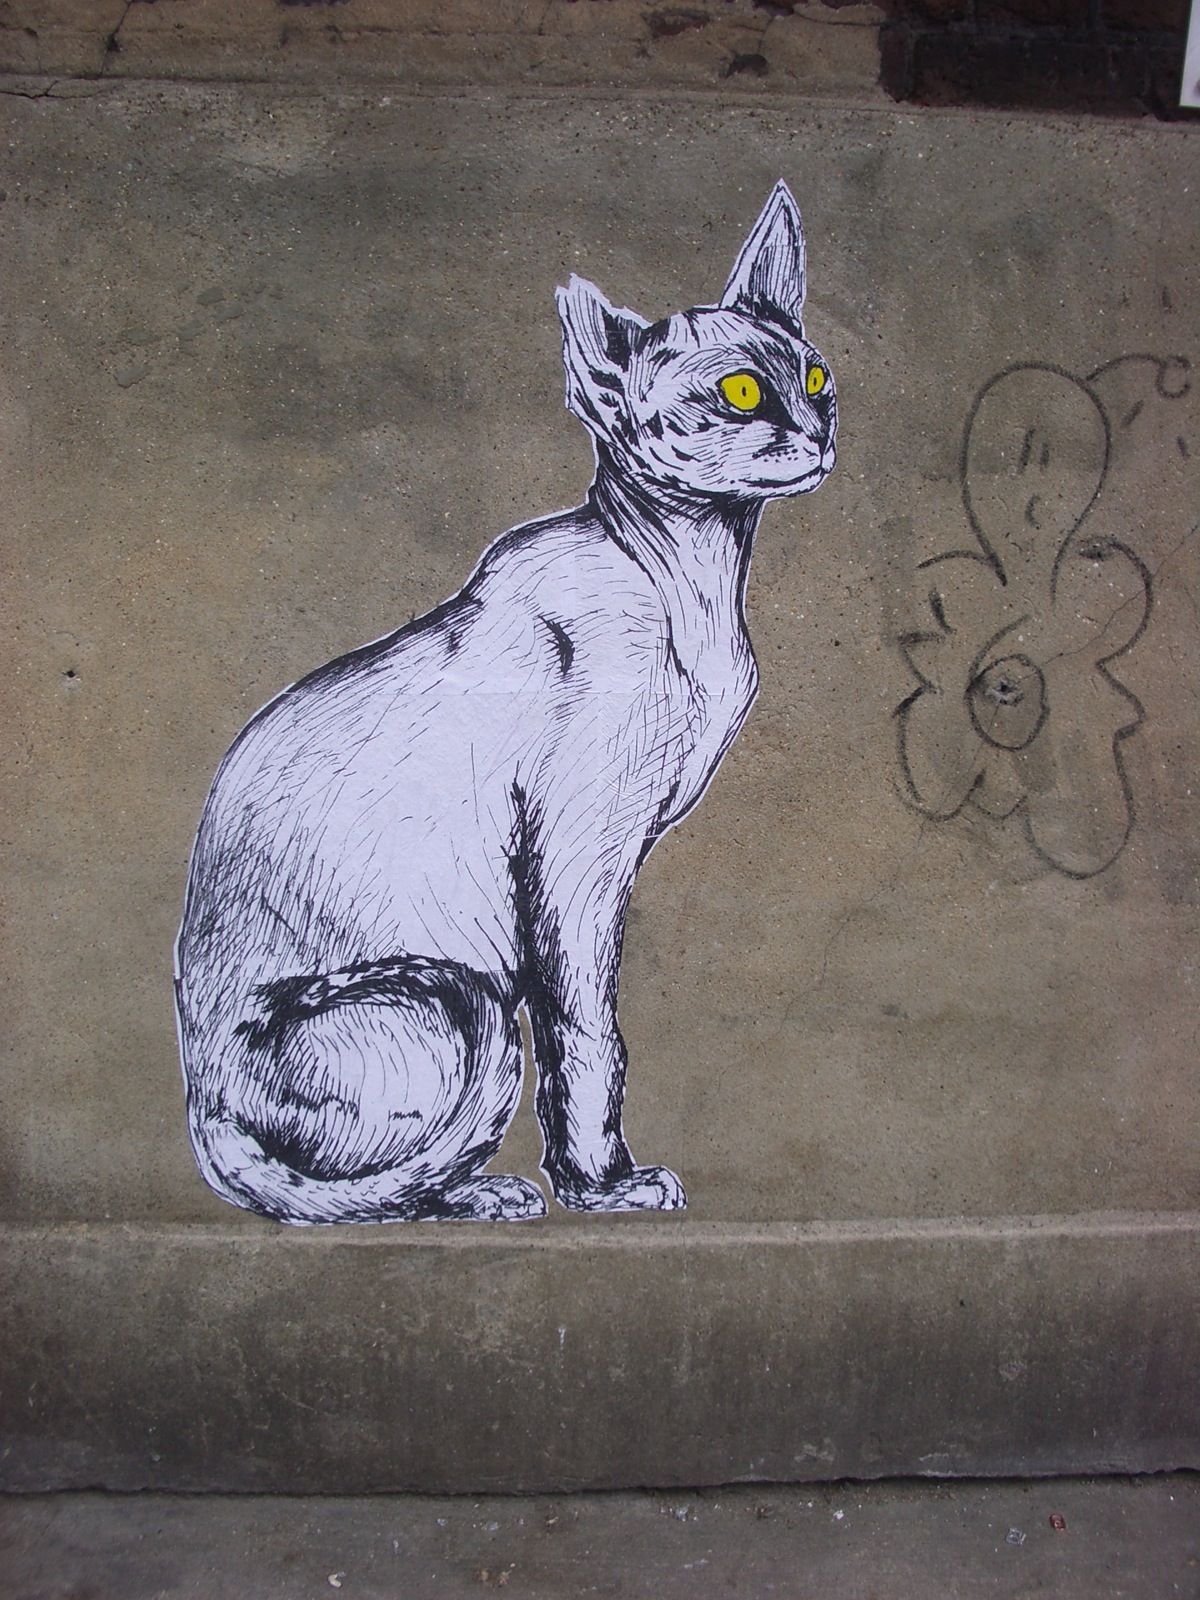 an intricate drawing of a cat painted on the side of a wall